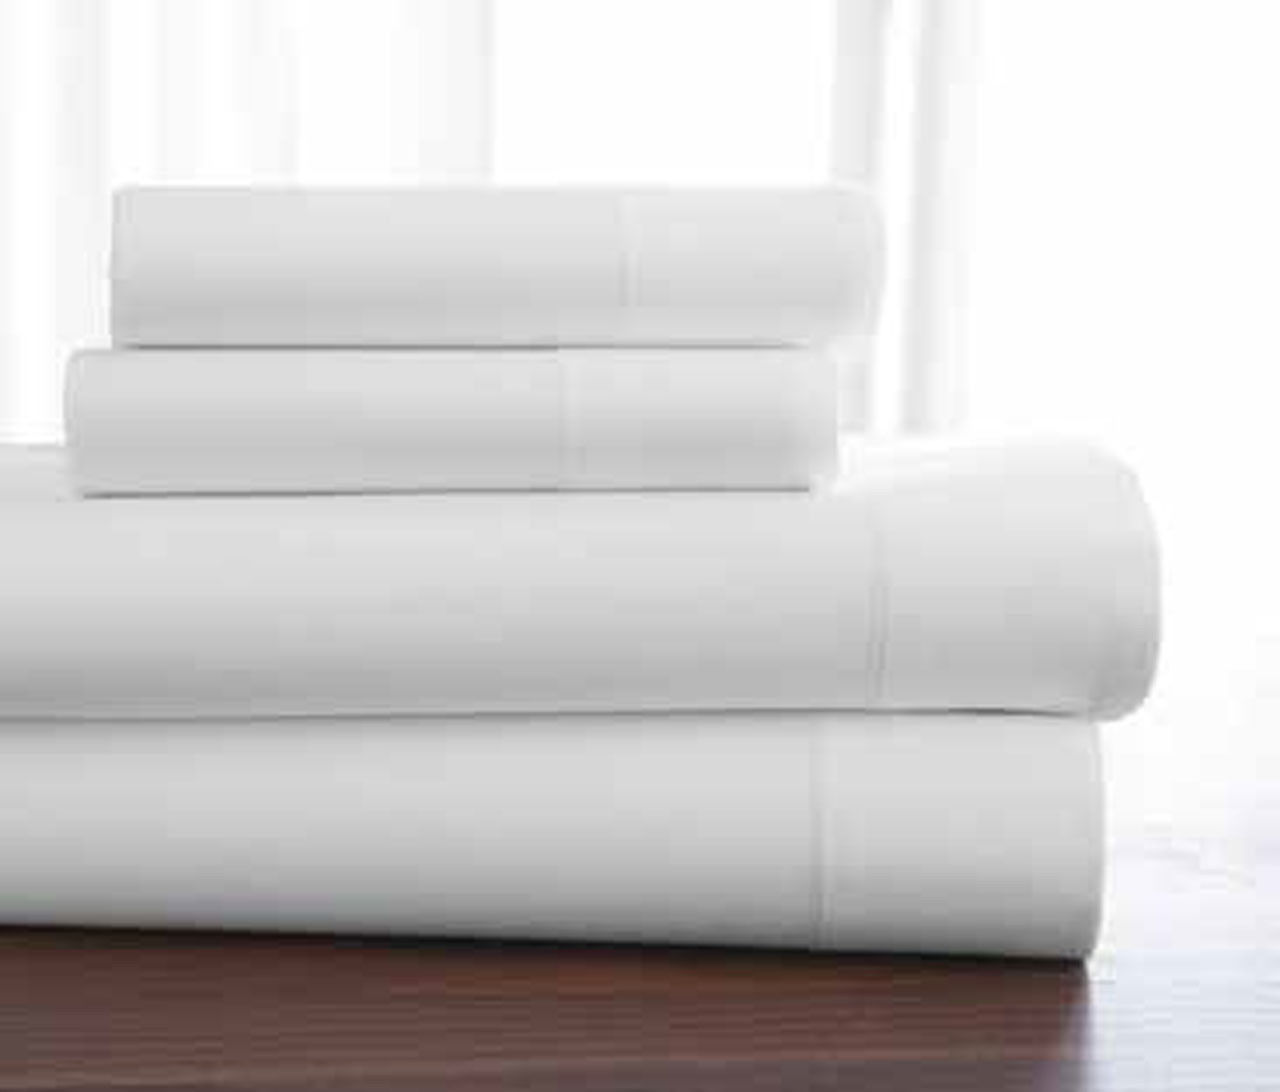 What are hygrocotton sheets?